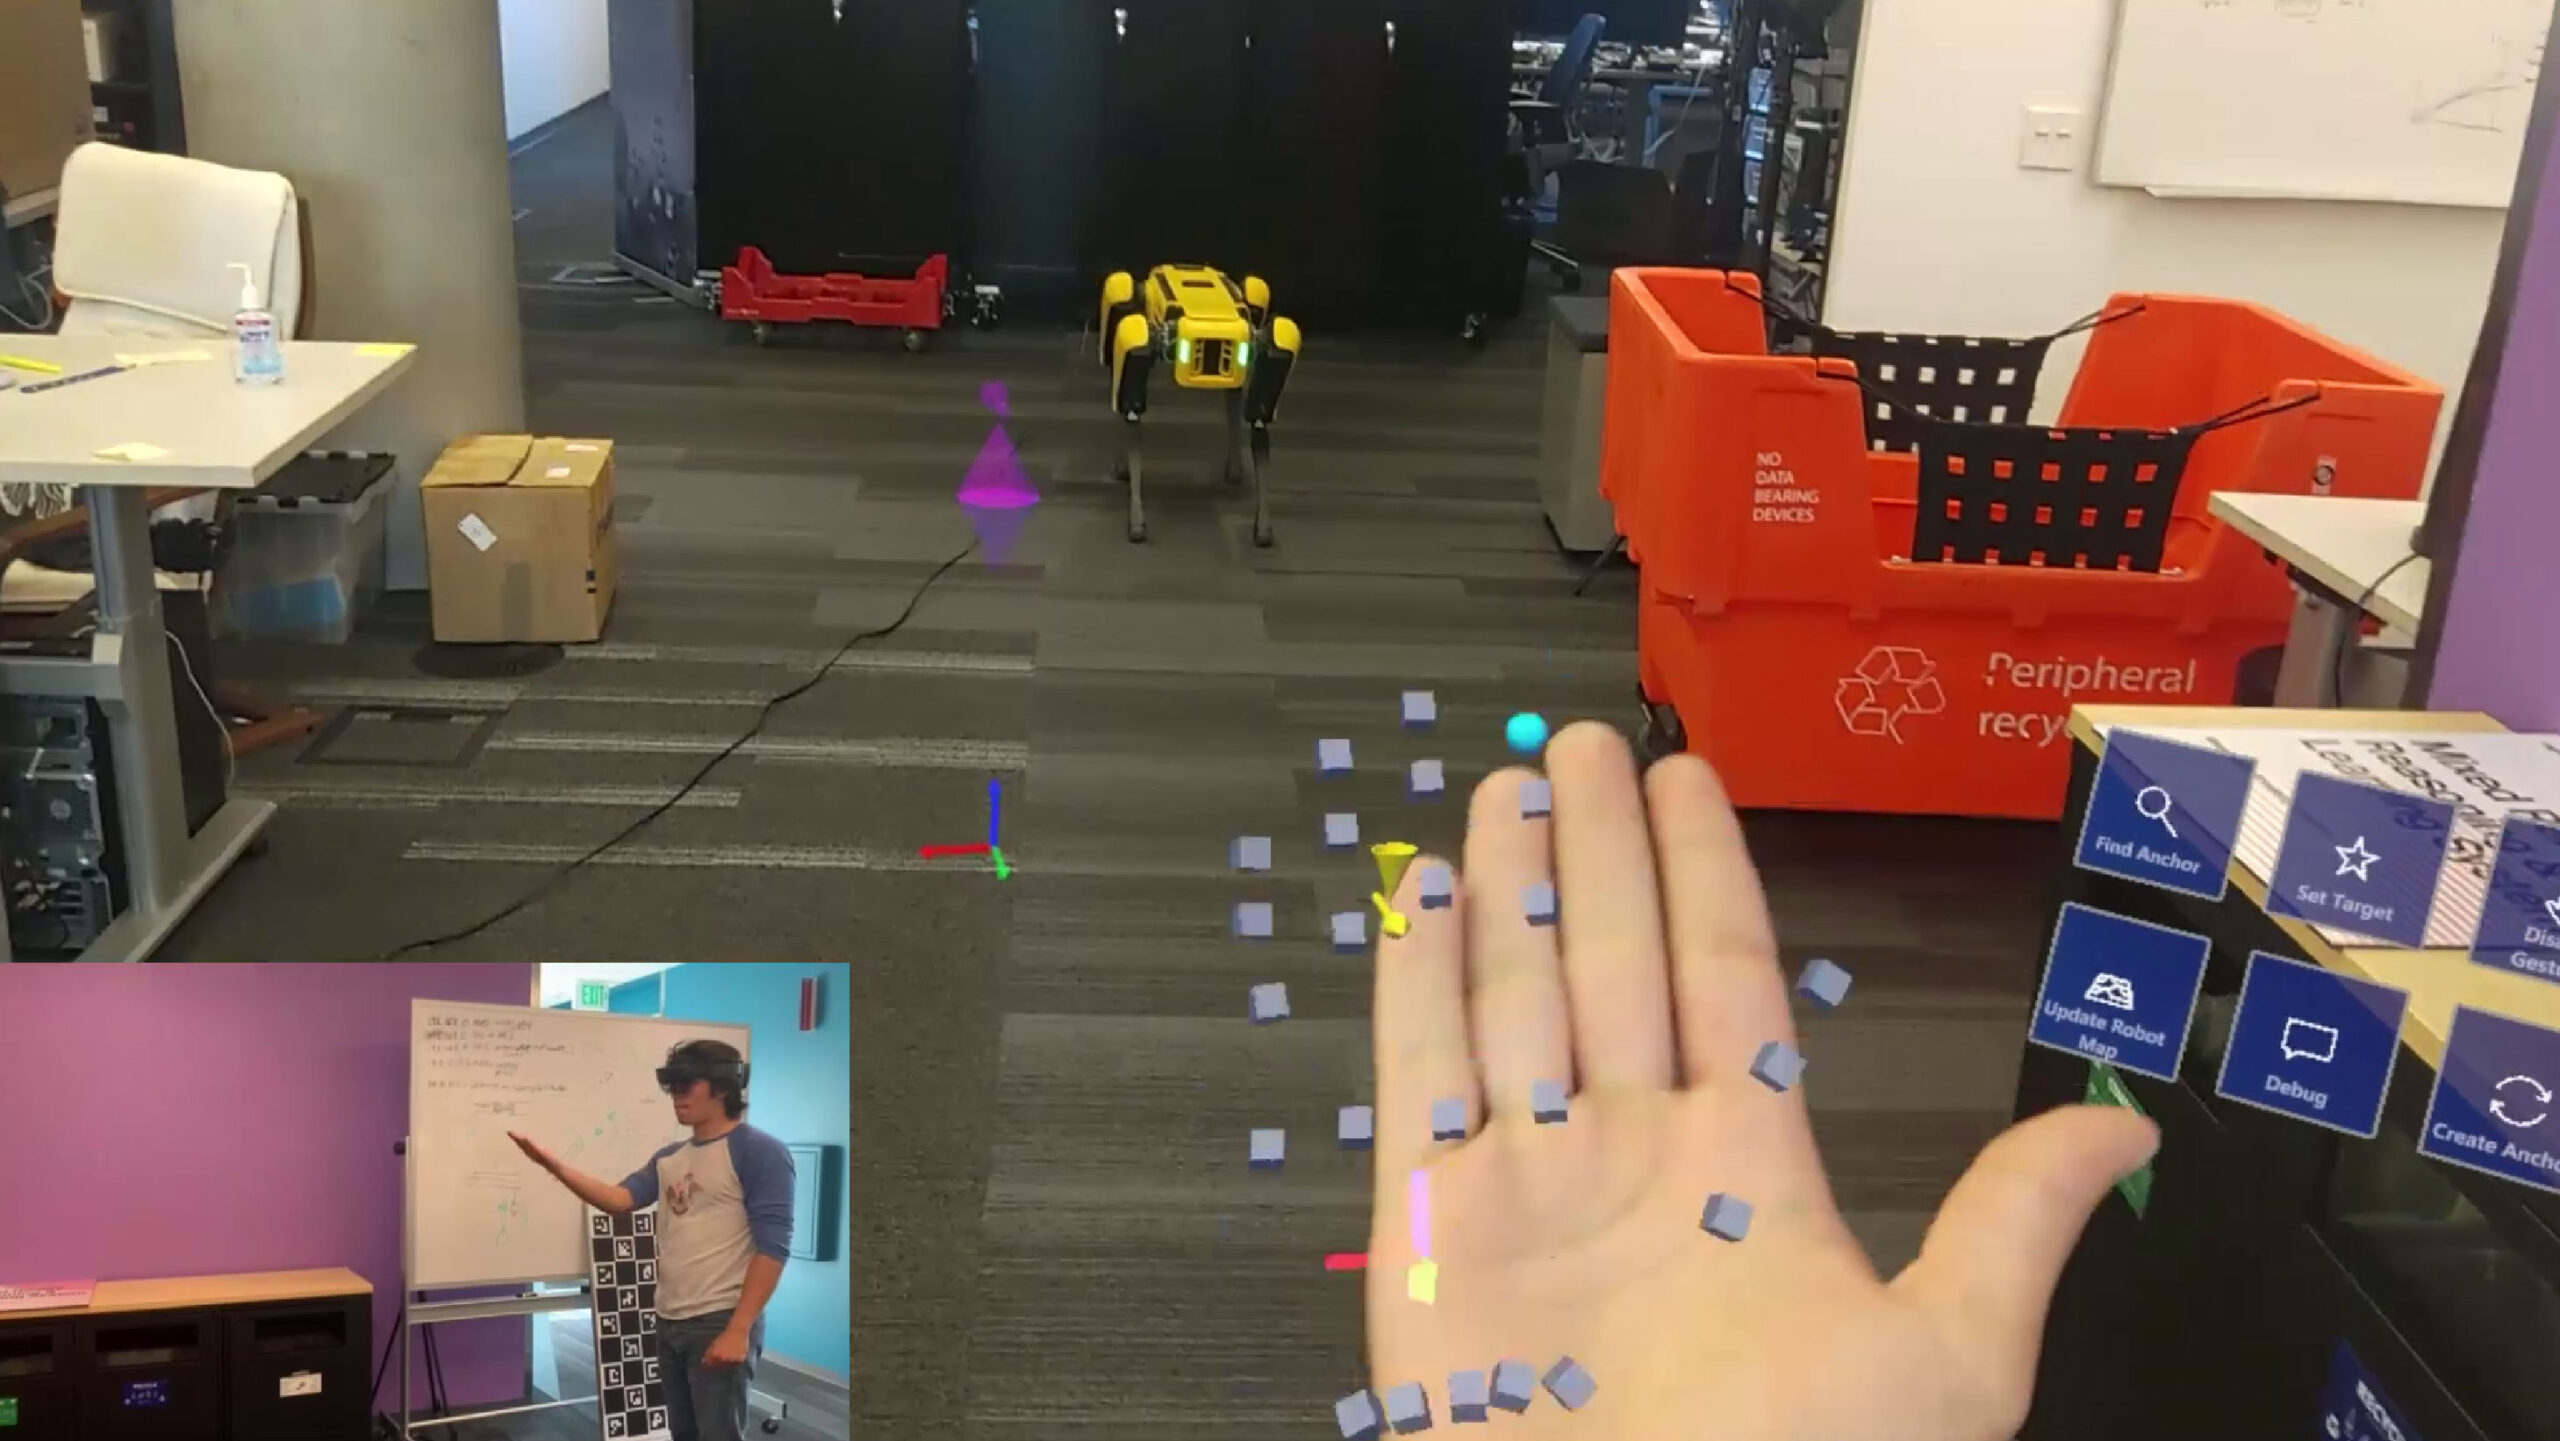 Enabling between mixed reality and via localization - Microsoft Research